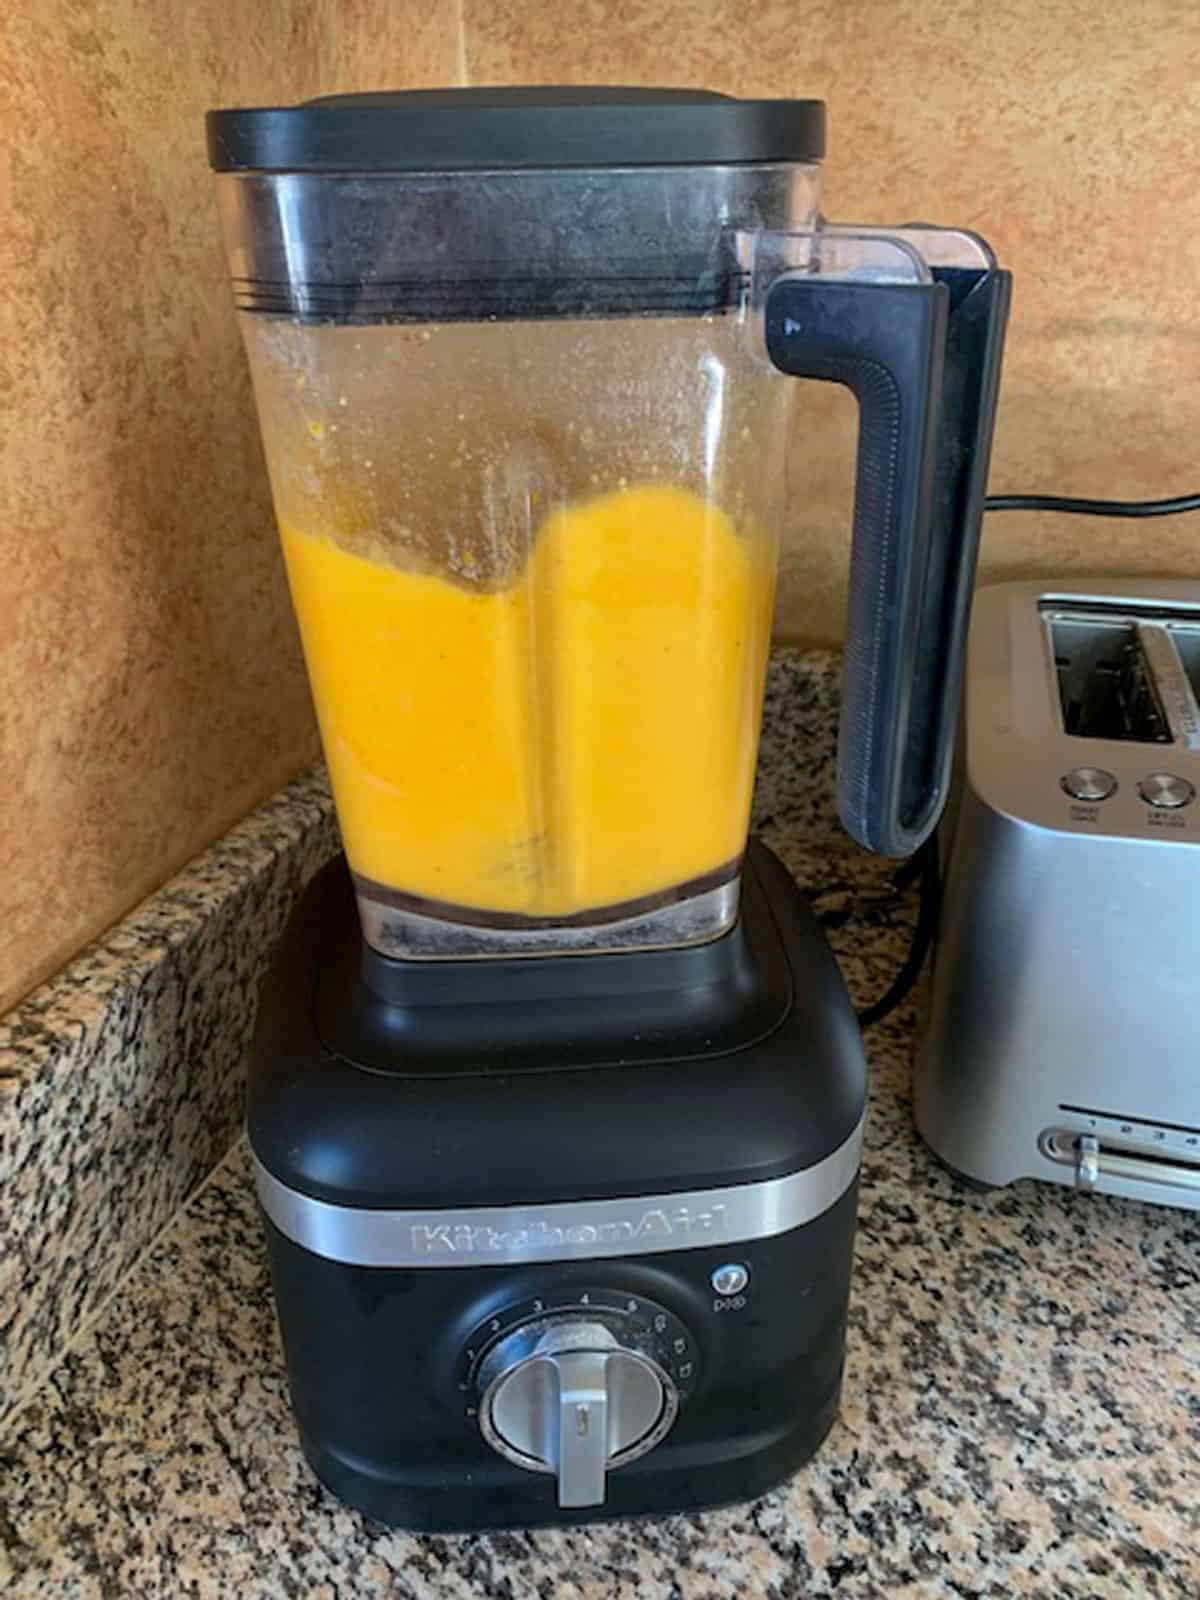 Puréed butternut squash cheese sauce in a blender.